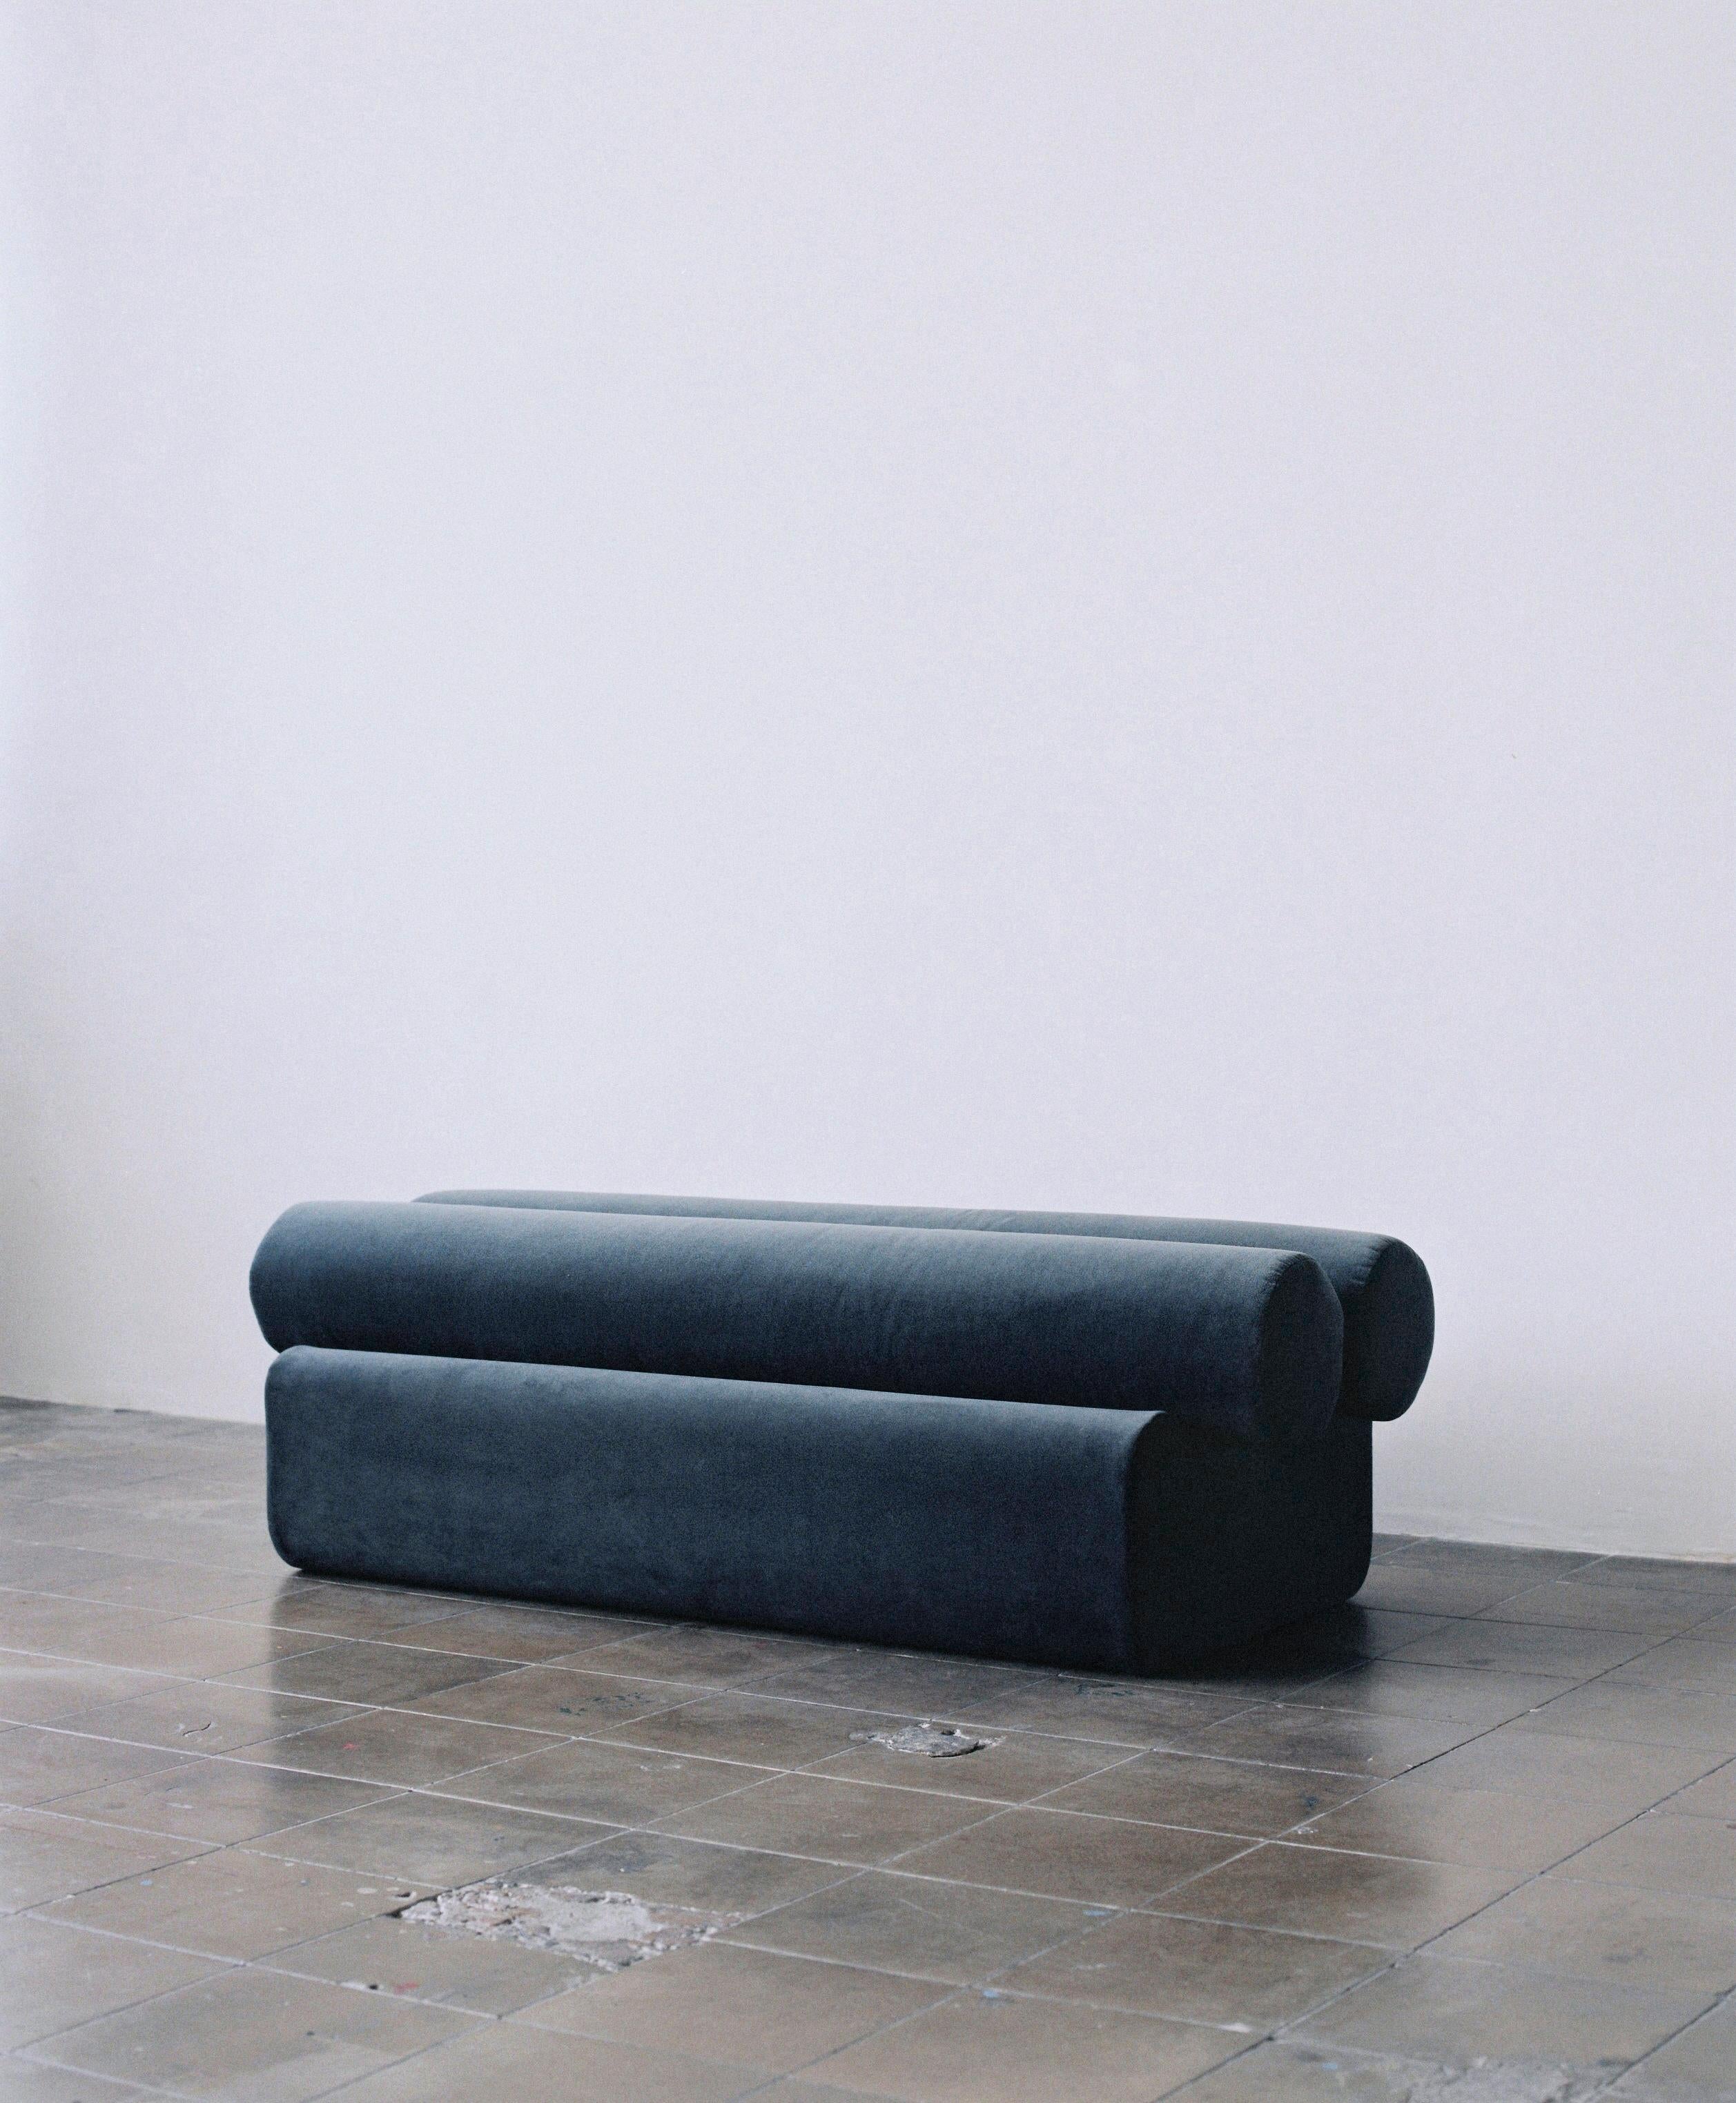 Pepino bench by Owl
Dimensions: L 140 x W 60 x H 46 cm
Materials: Plywood base, upholstered

La Pepino is a collection of only seating, which consists of the repetition of cylindrical cushions, supported by an organically shaped base. Every